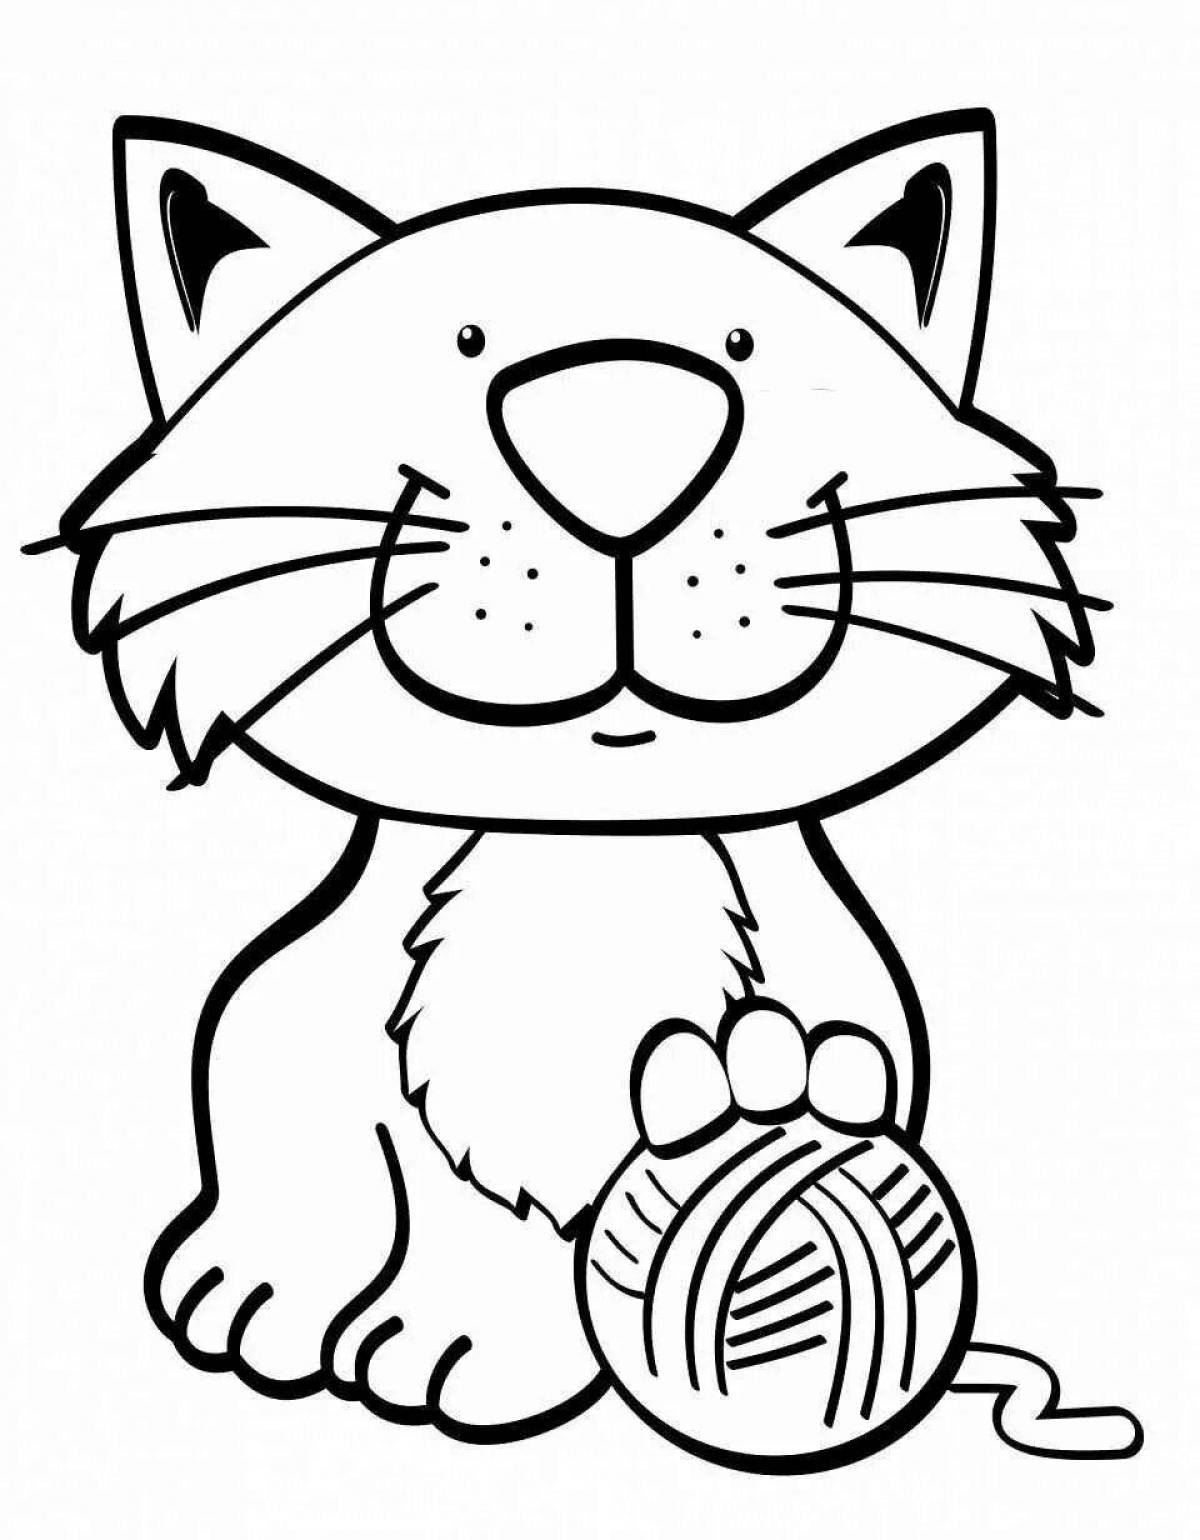 Cute cartoon cat coloring pages